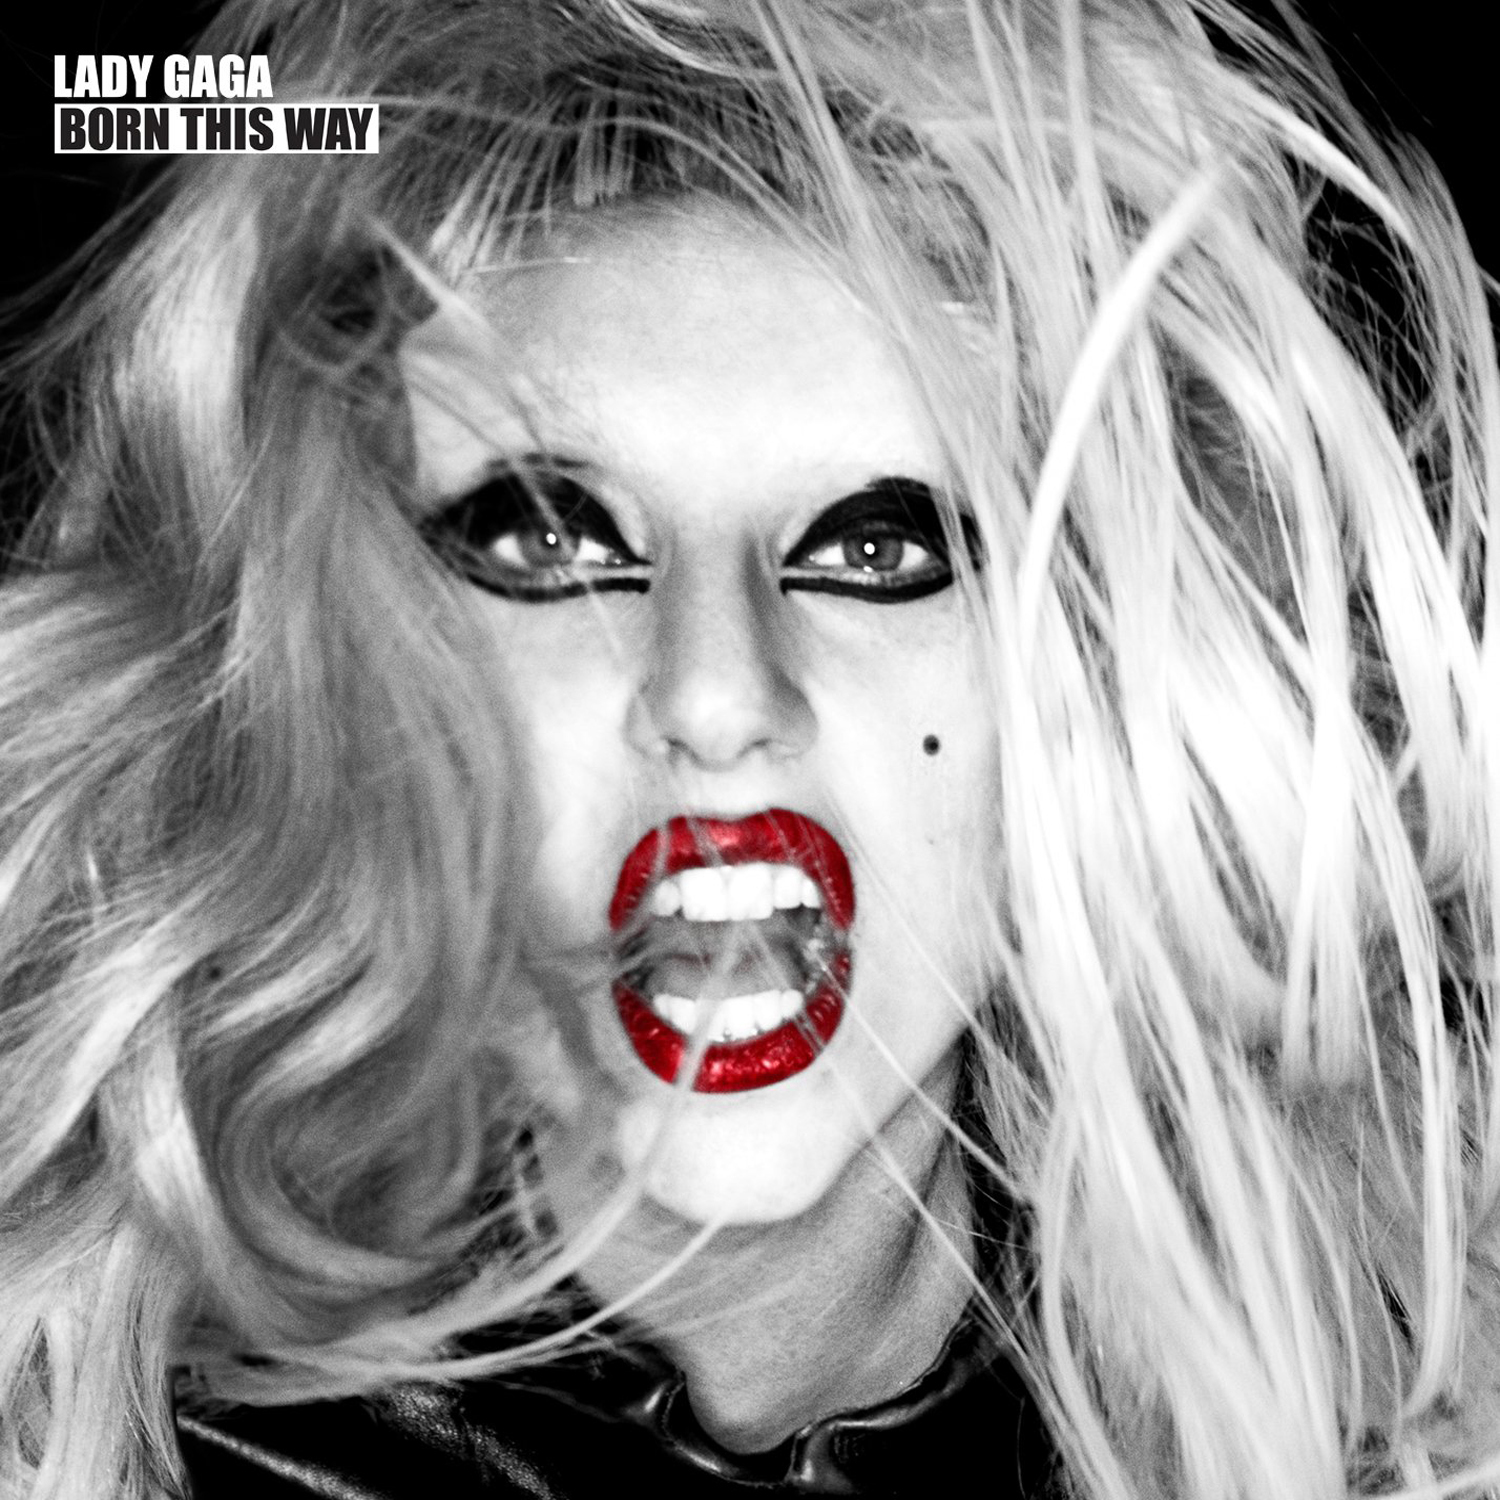 http://1.bp.blogspot.com/-f4dFFaLyVTk/Ty9wcDfzDNI/AAAAAAAABJI/_tOh73sse3Y/s1600/Lady-GaGa-Born-This-Way-Official-Album-Cover-Deluxe-Edition%2BNormal.jpg